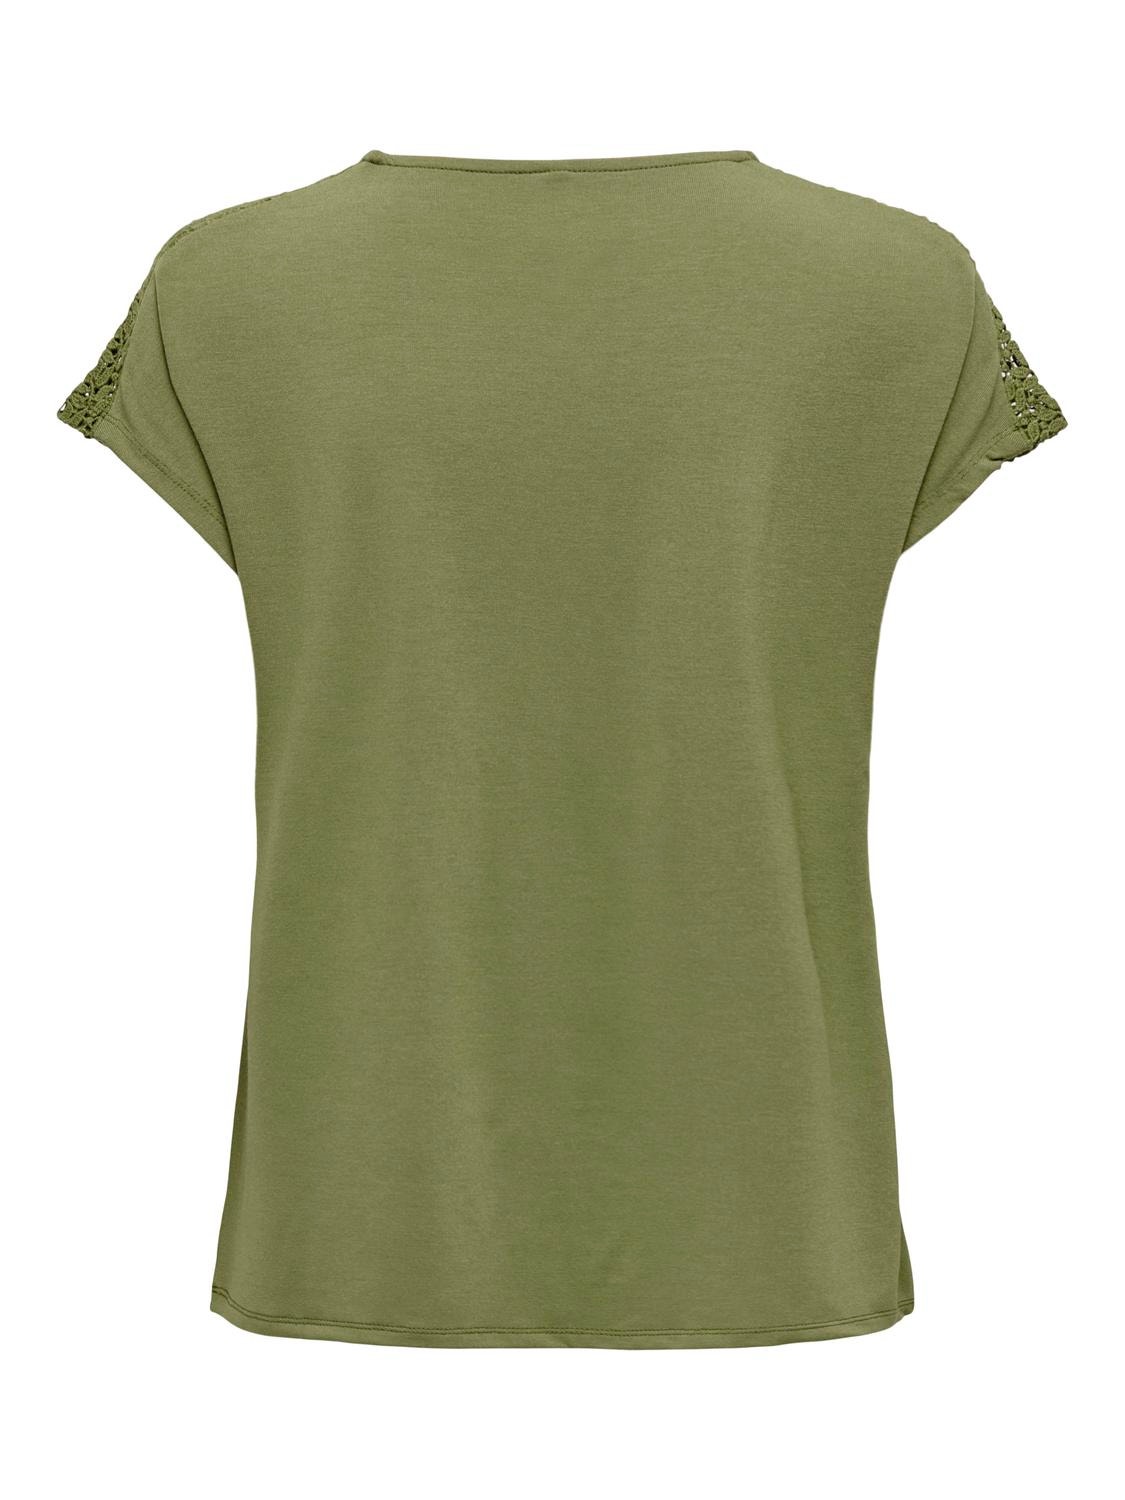 ONLY O-Neck Top With Lace Details -Martini Olive - 15289589